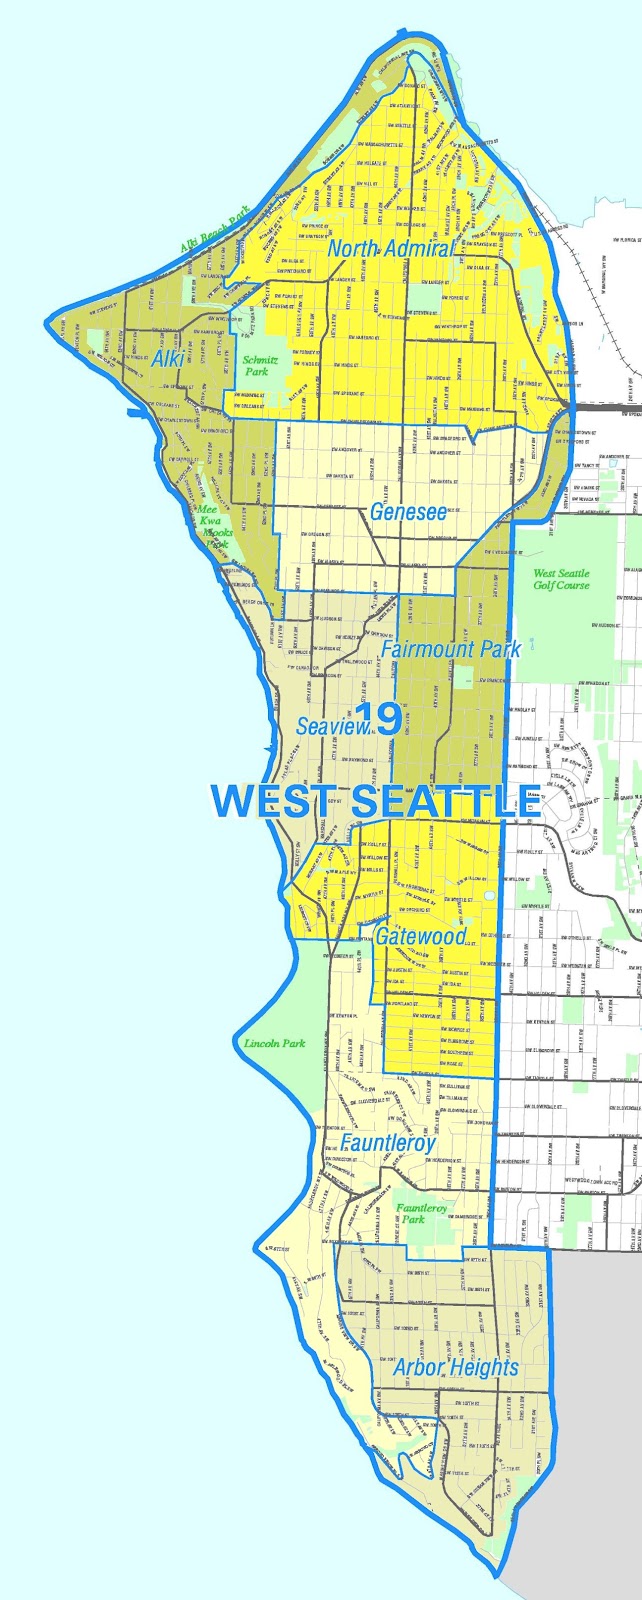 Seattle/West Seattle Real Estate Forum: Do You Know West ...